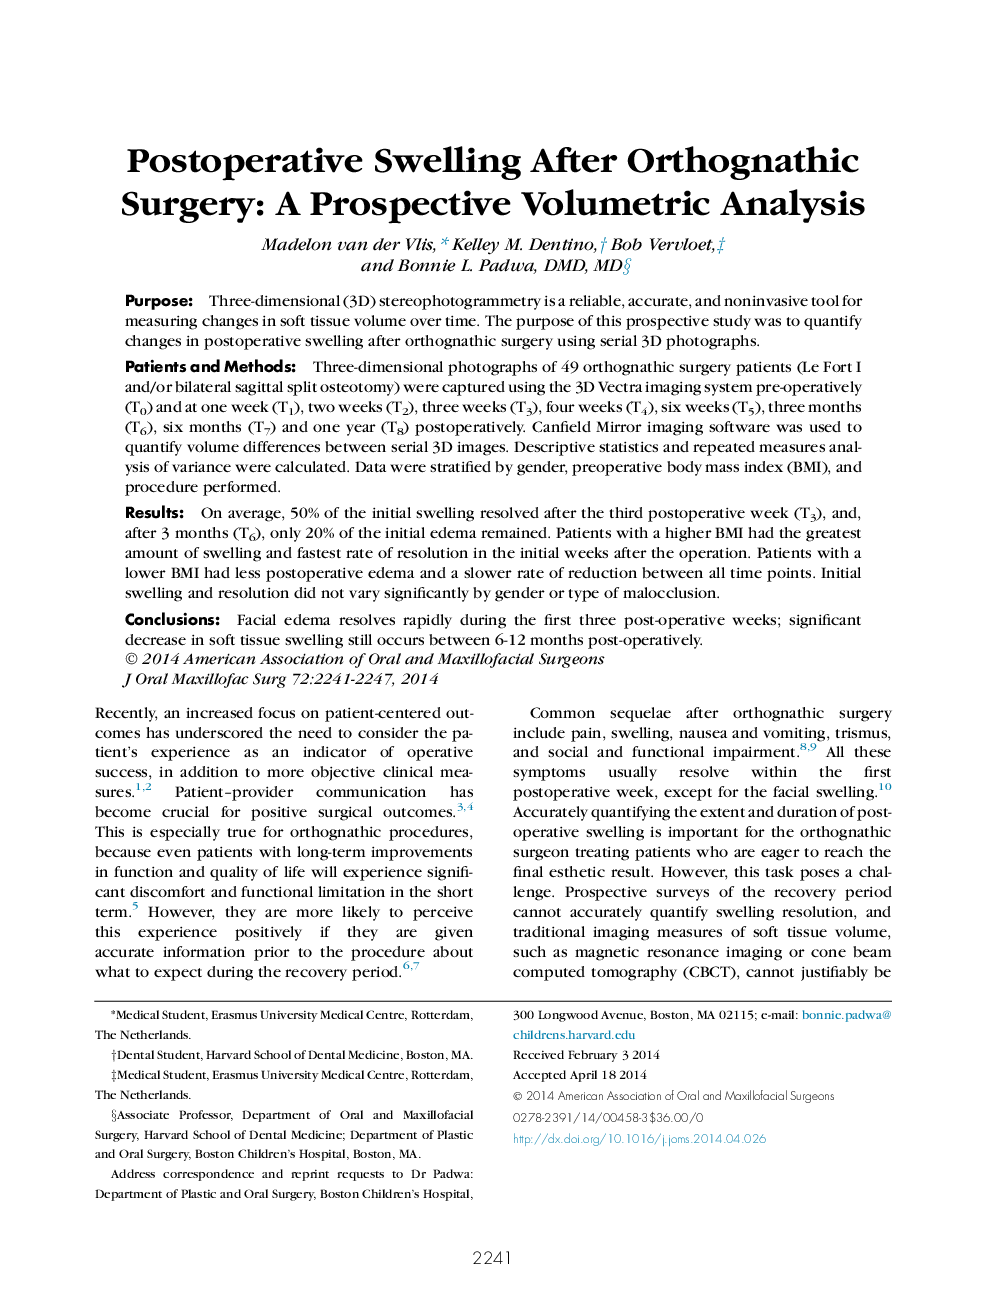 Postoperative Swelling After Orthognathic Surgery: A Prospective Volumetric Analysis